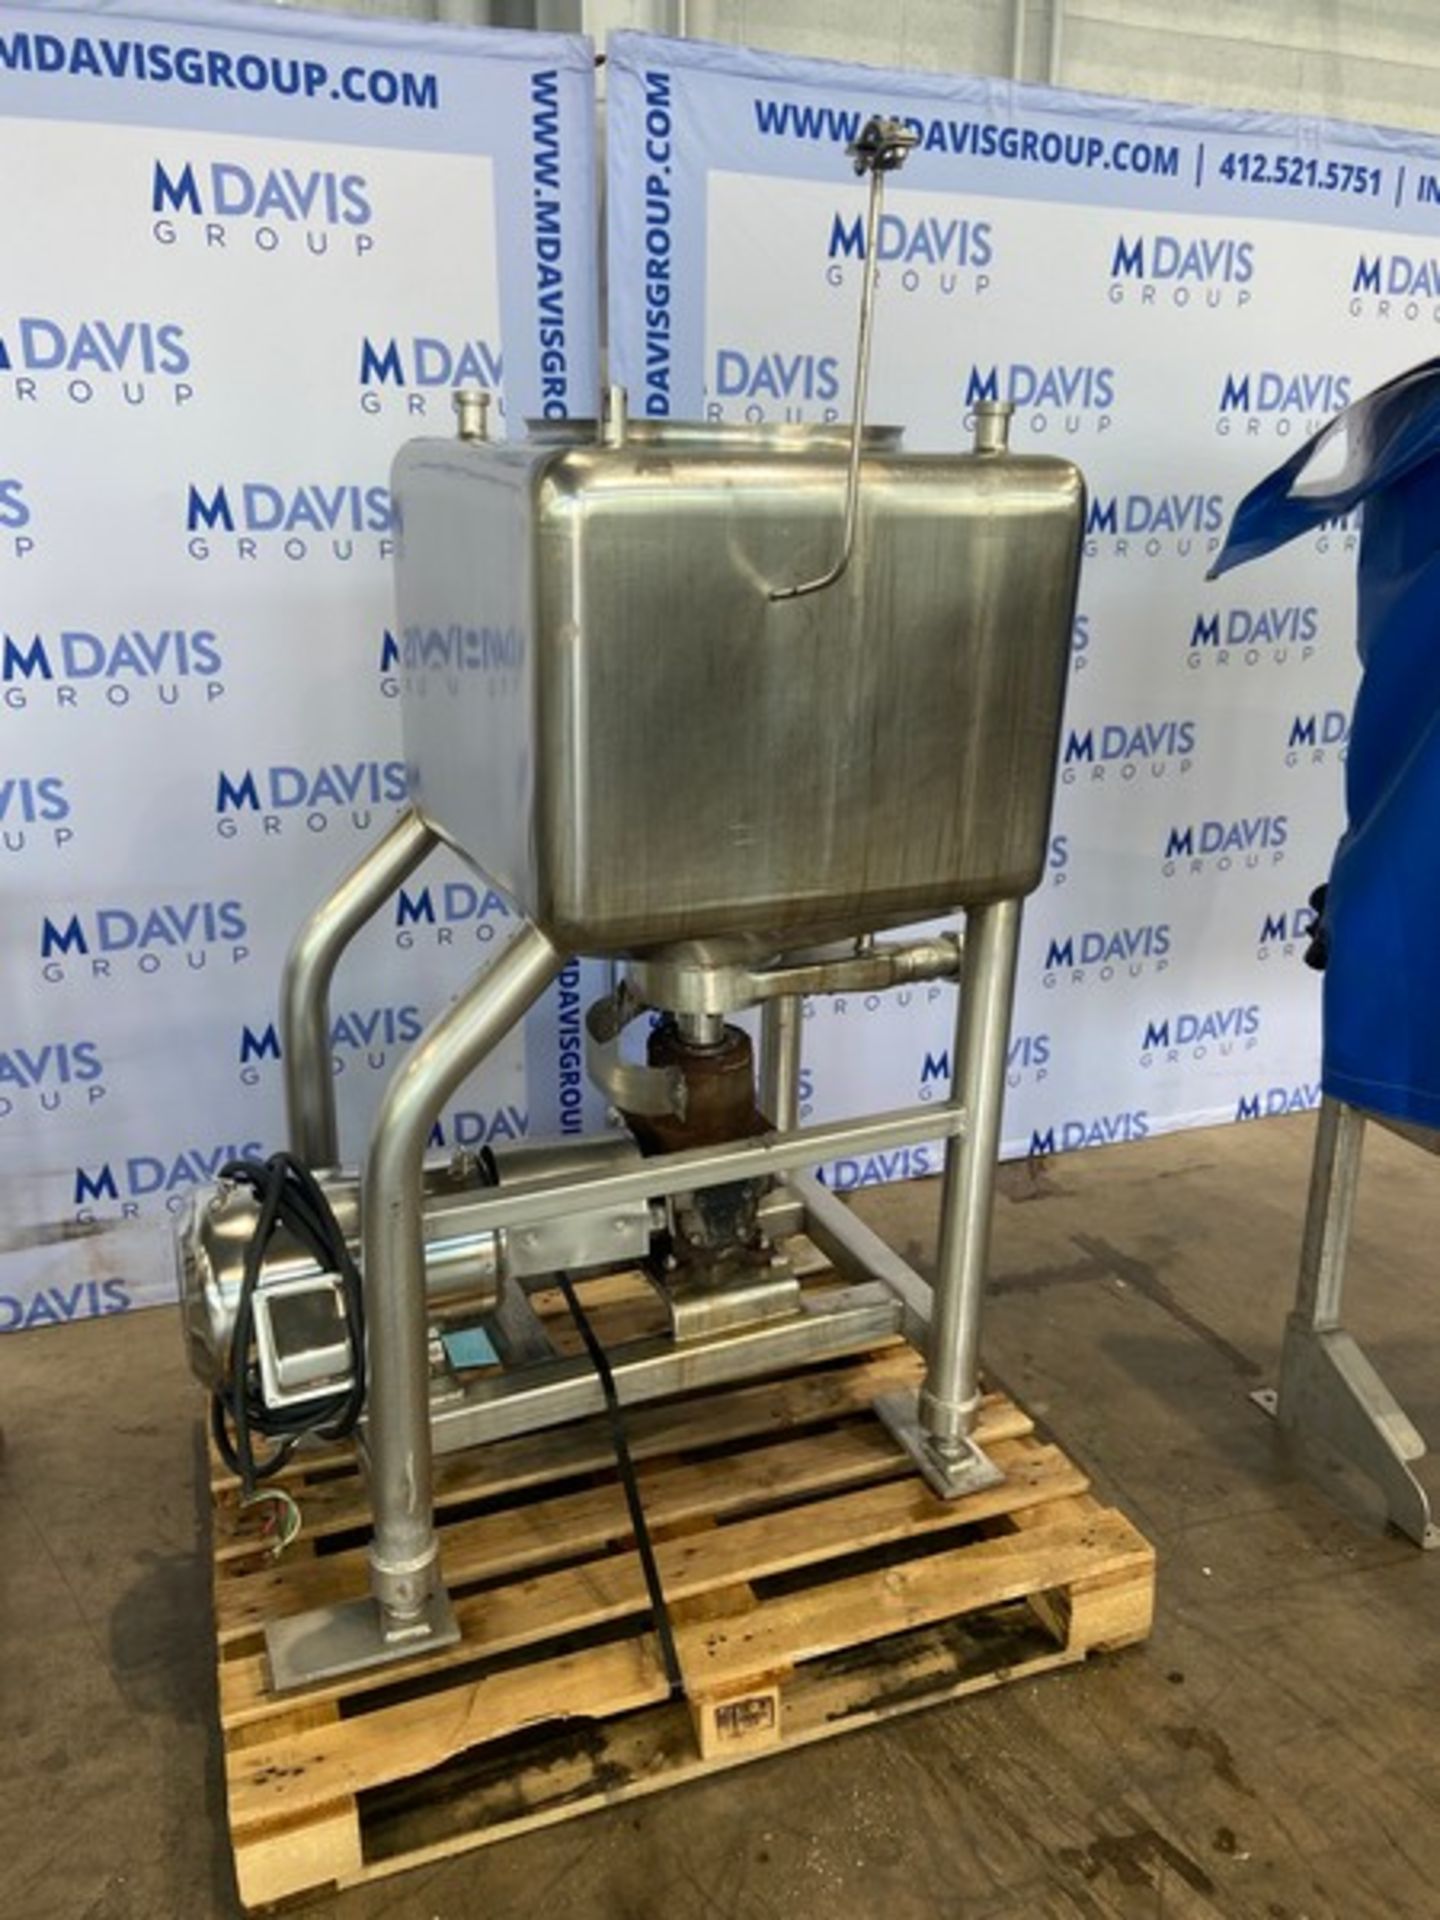 Aprox. 40 Gal. S/S Liquifier,Internal Dims.: Aprox. 24" L x 24" W x 18" H, with 10 hp S/S Clad